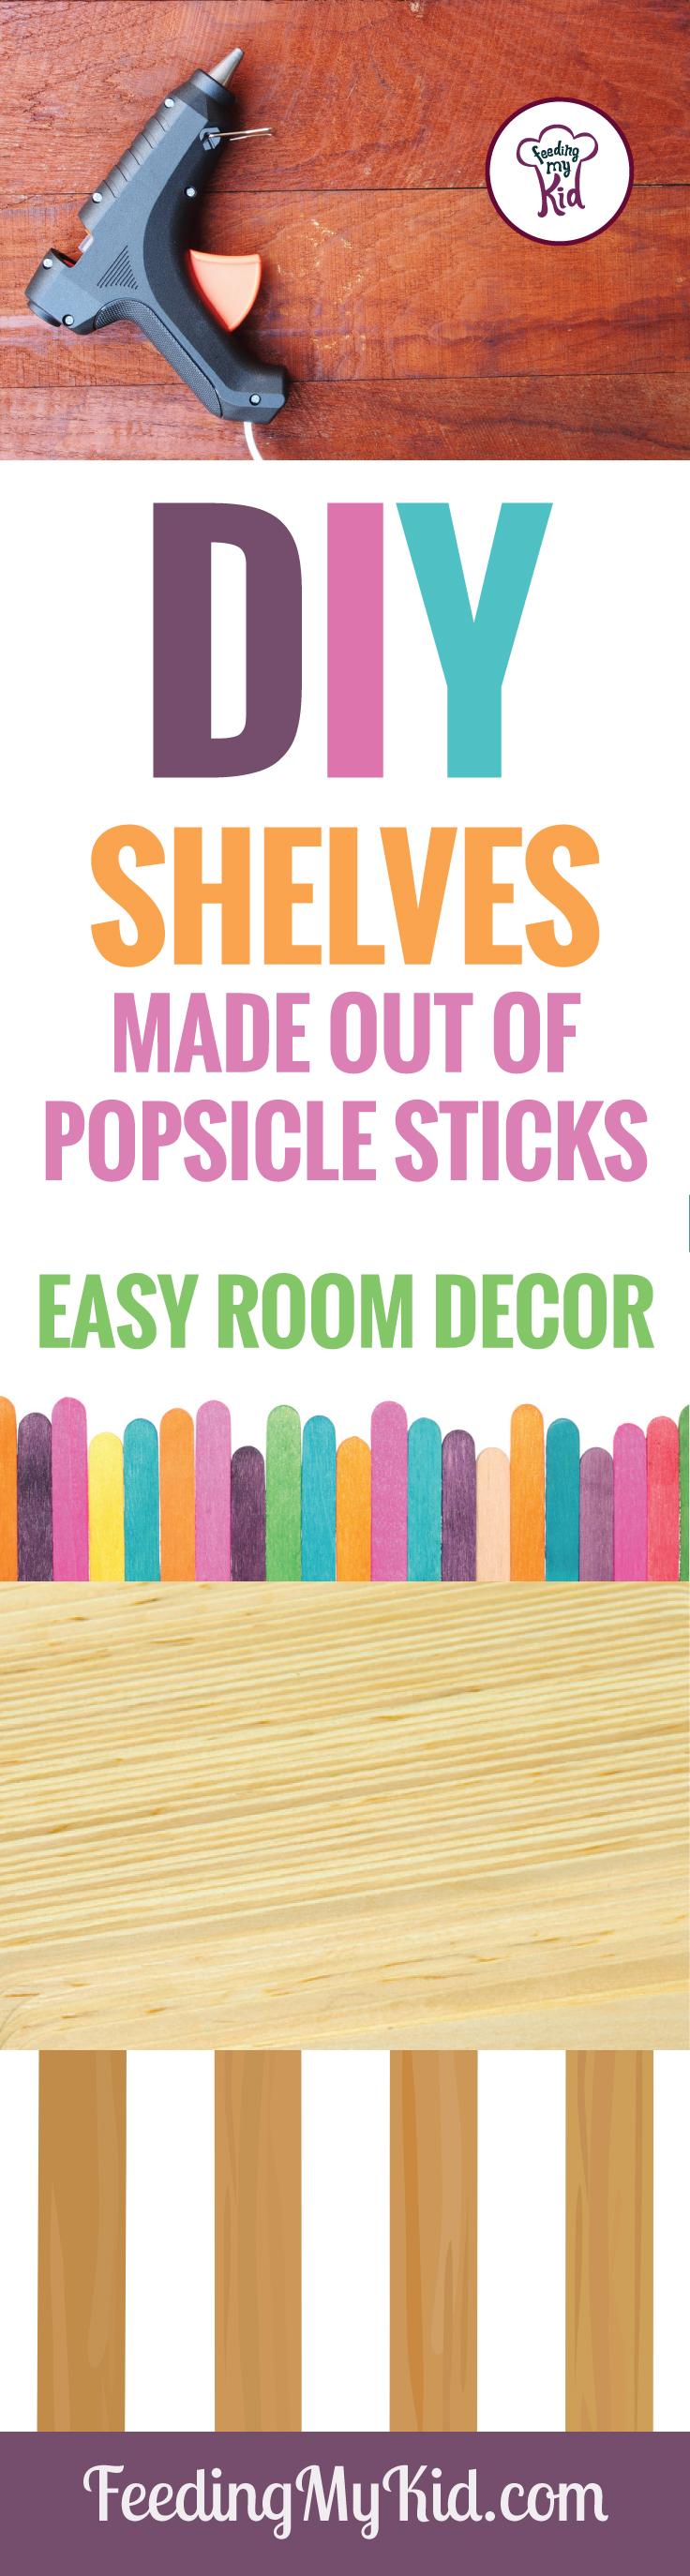 Check out how to make these creative DIY shelves. These DIY shelves are made completely with popsicle sticks. Easy and simple room decor!